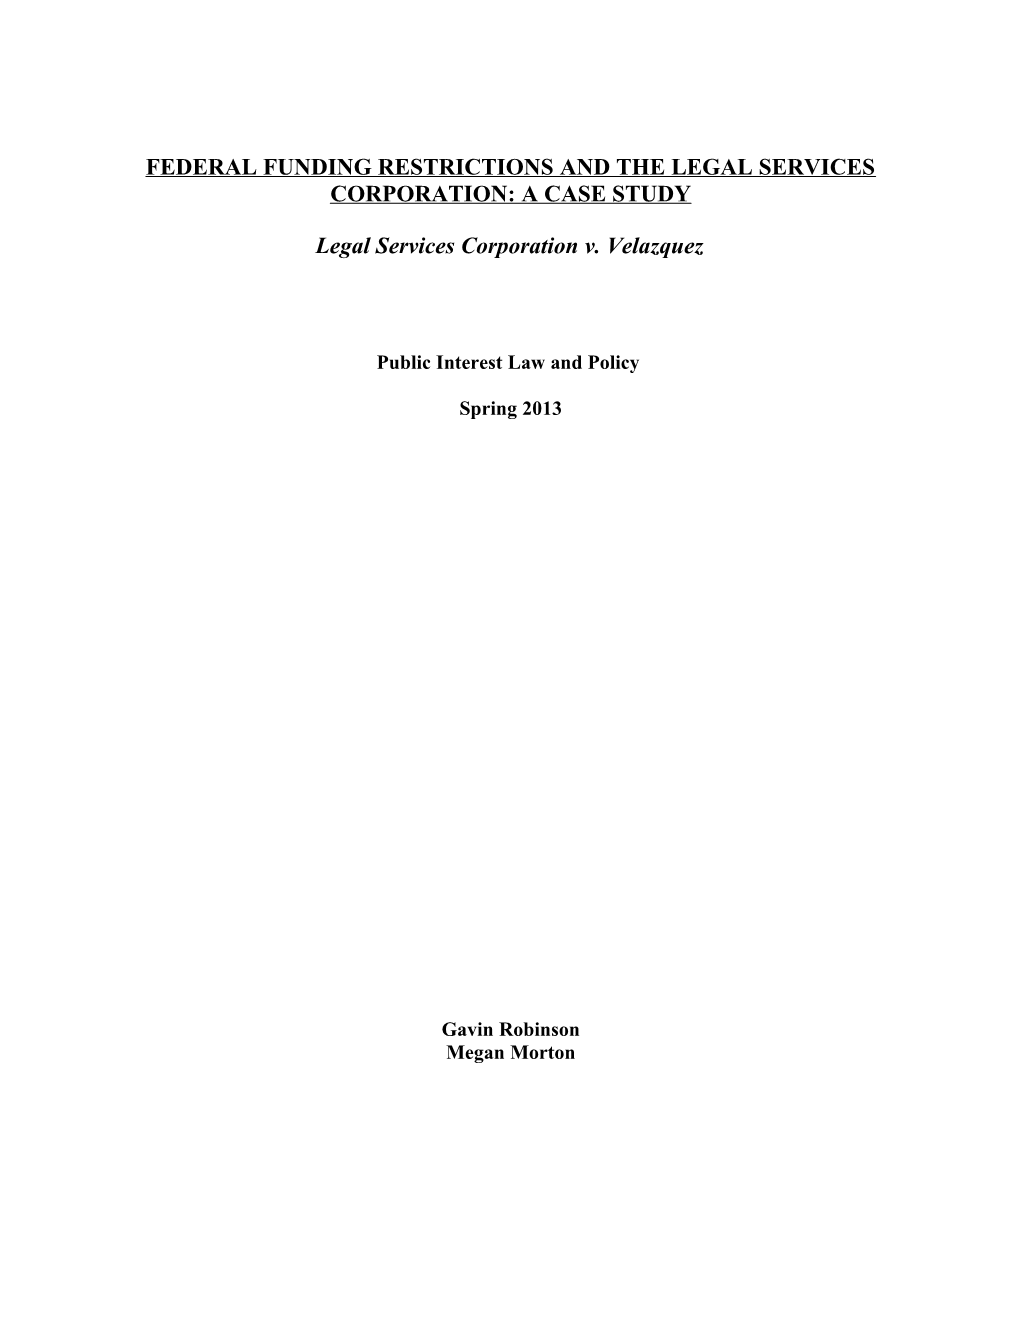 Federal Funding Restrictions and the Legal Services Corporation: a Case Study